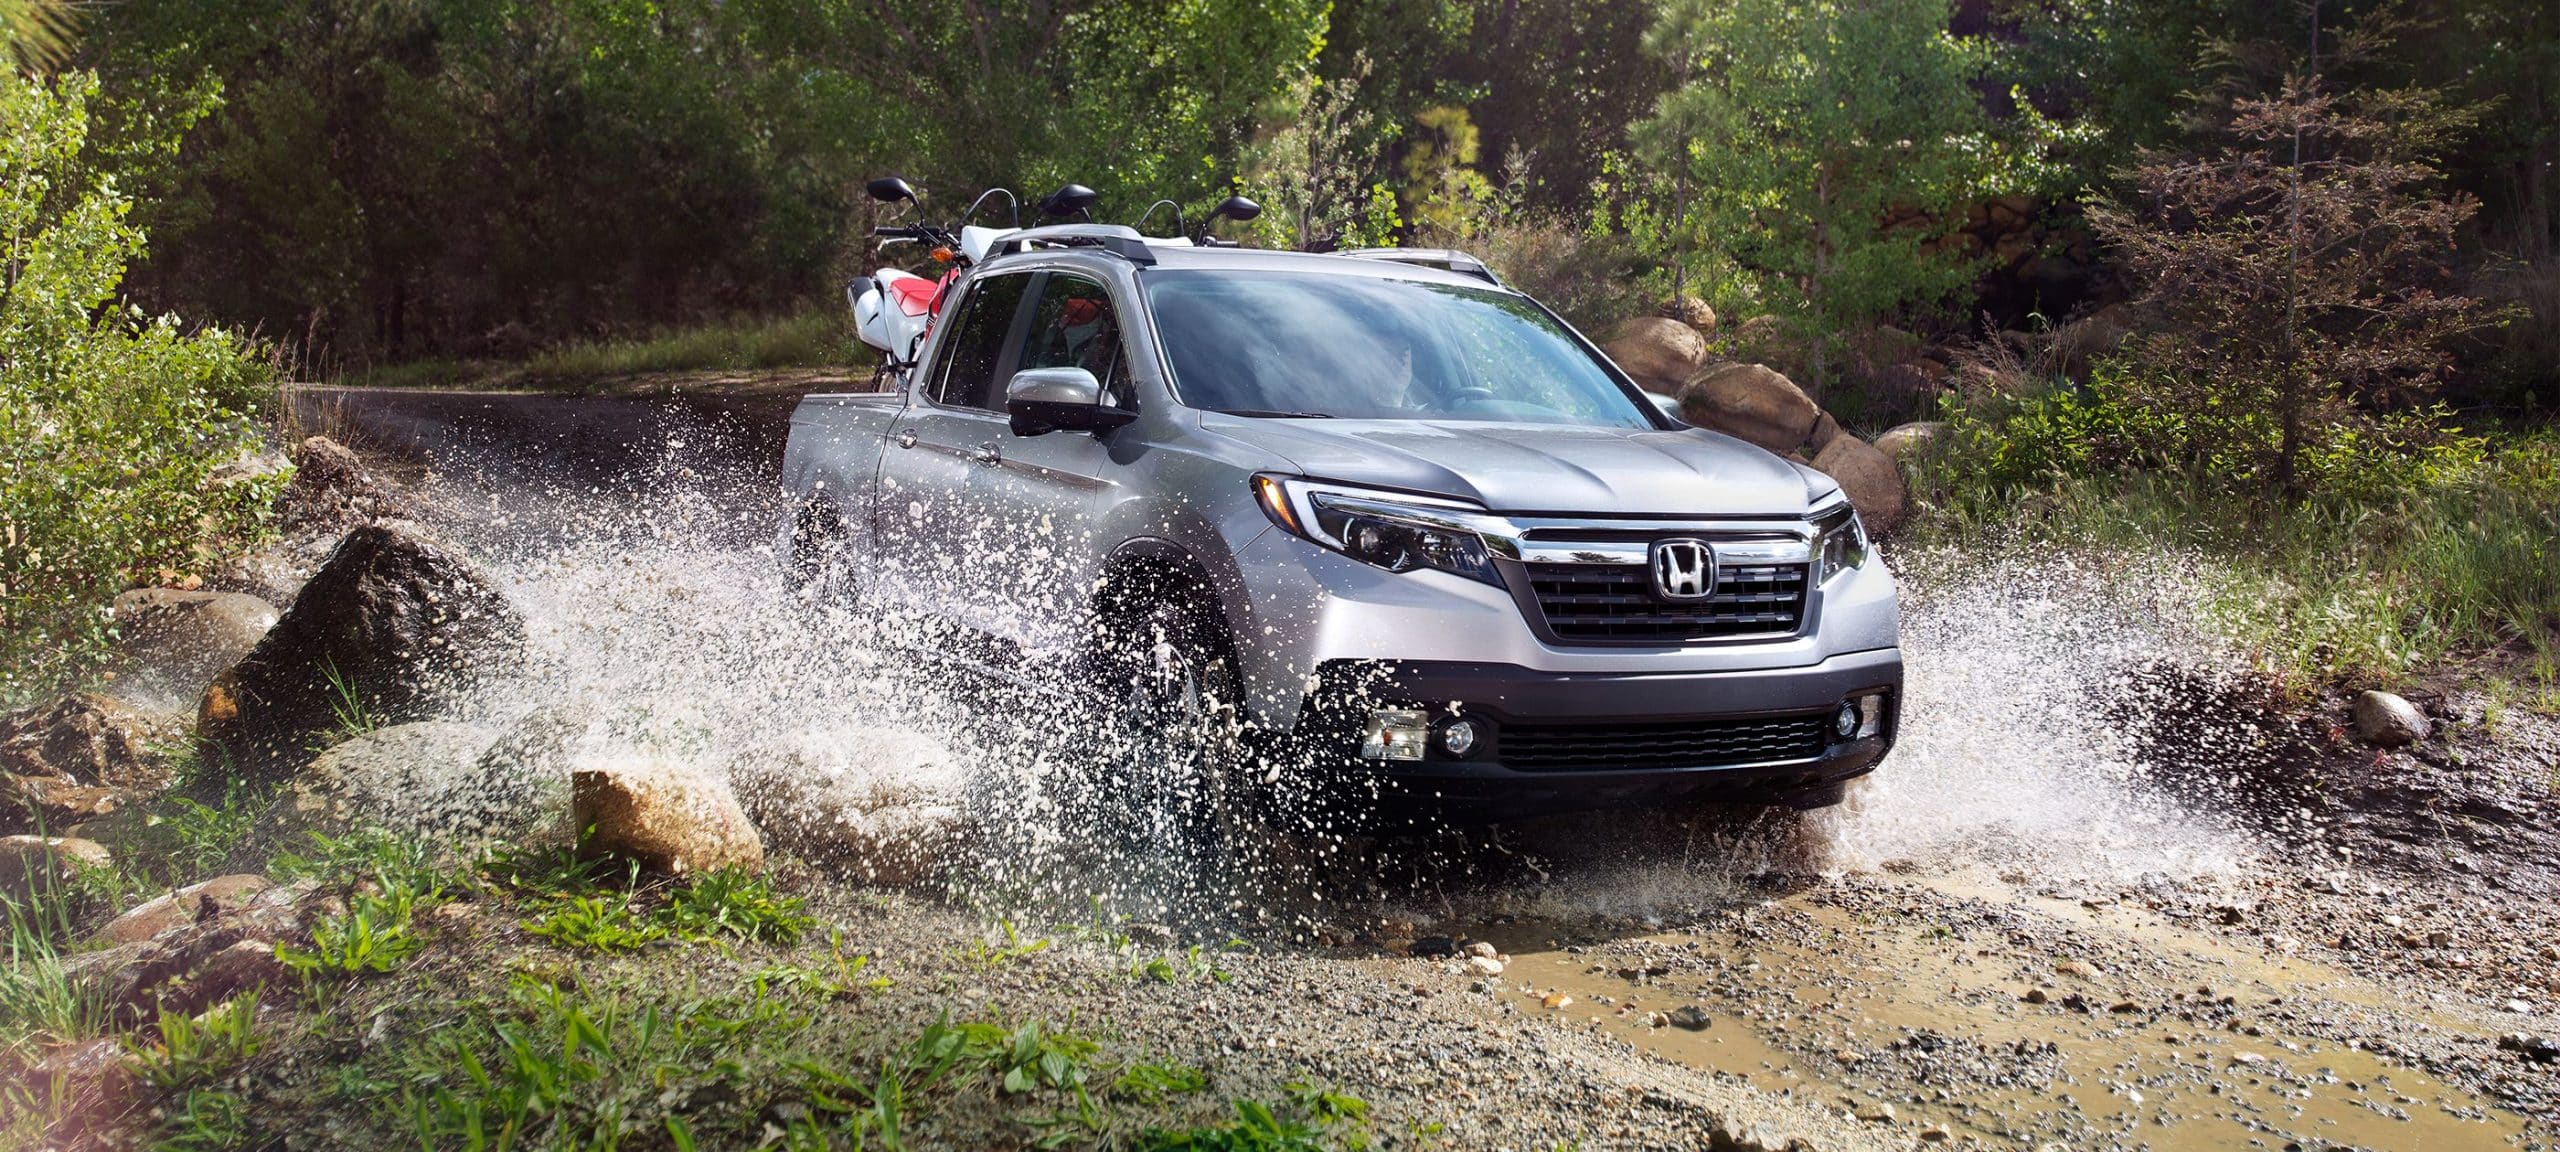 2020 Honda Ridgeline side view from front off road drive driving through water 4k uhd wallpaper